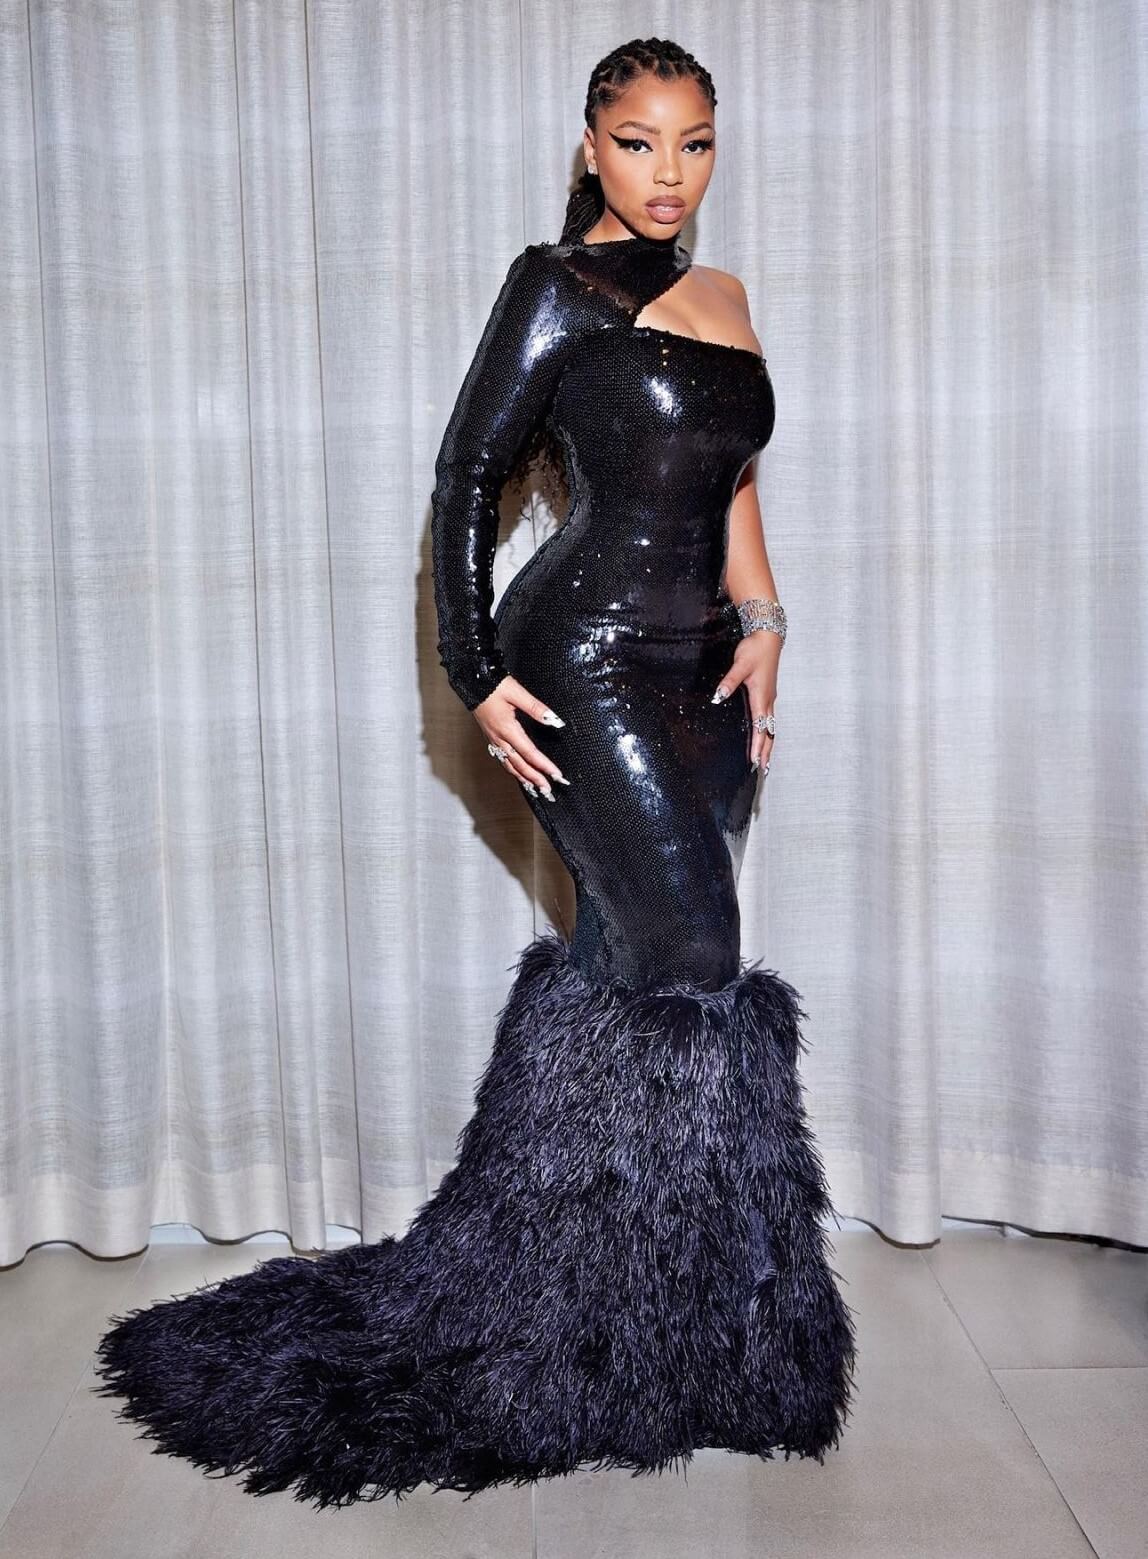 Chloe Bailey Bold Looks In Black Shiny Leather With Feather Style  Long Dress